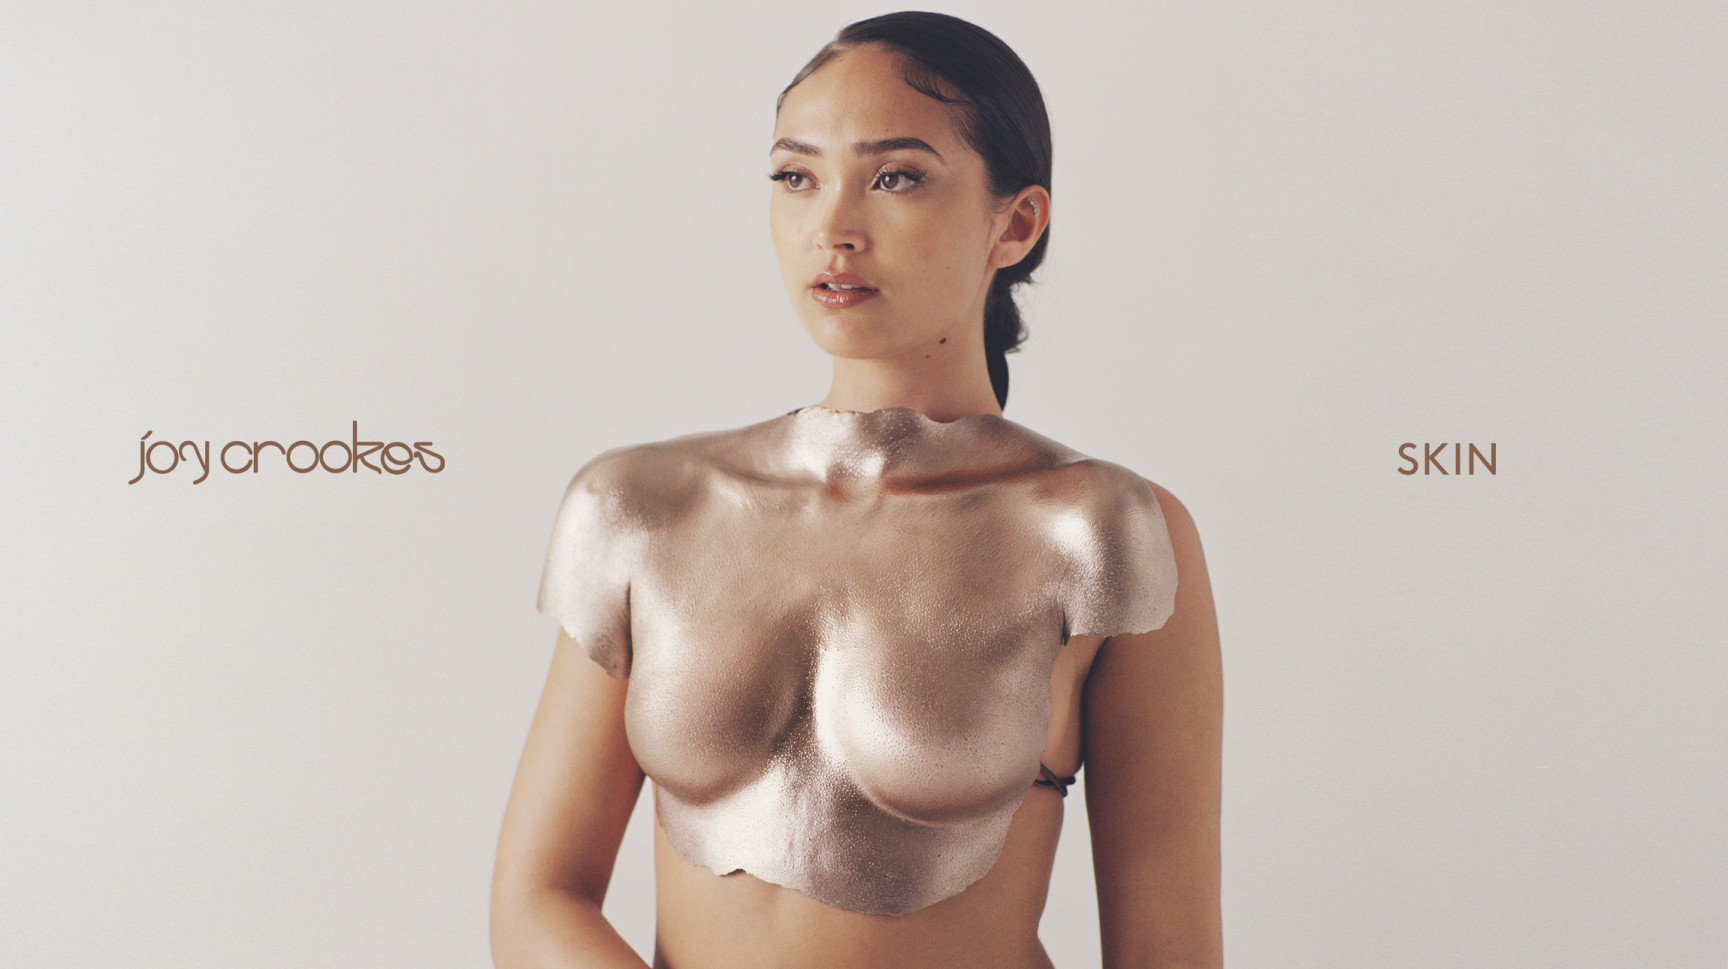 Art Direction & Design / Music<br /><strong>Joy Crookes</strong>